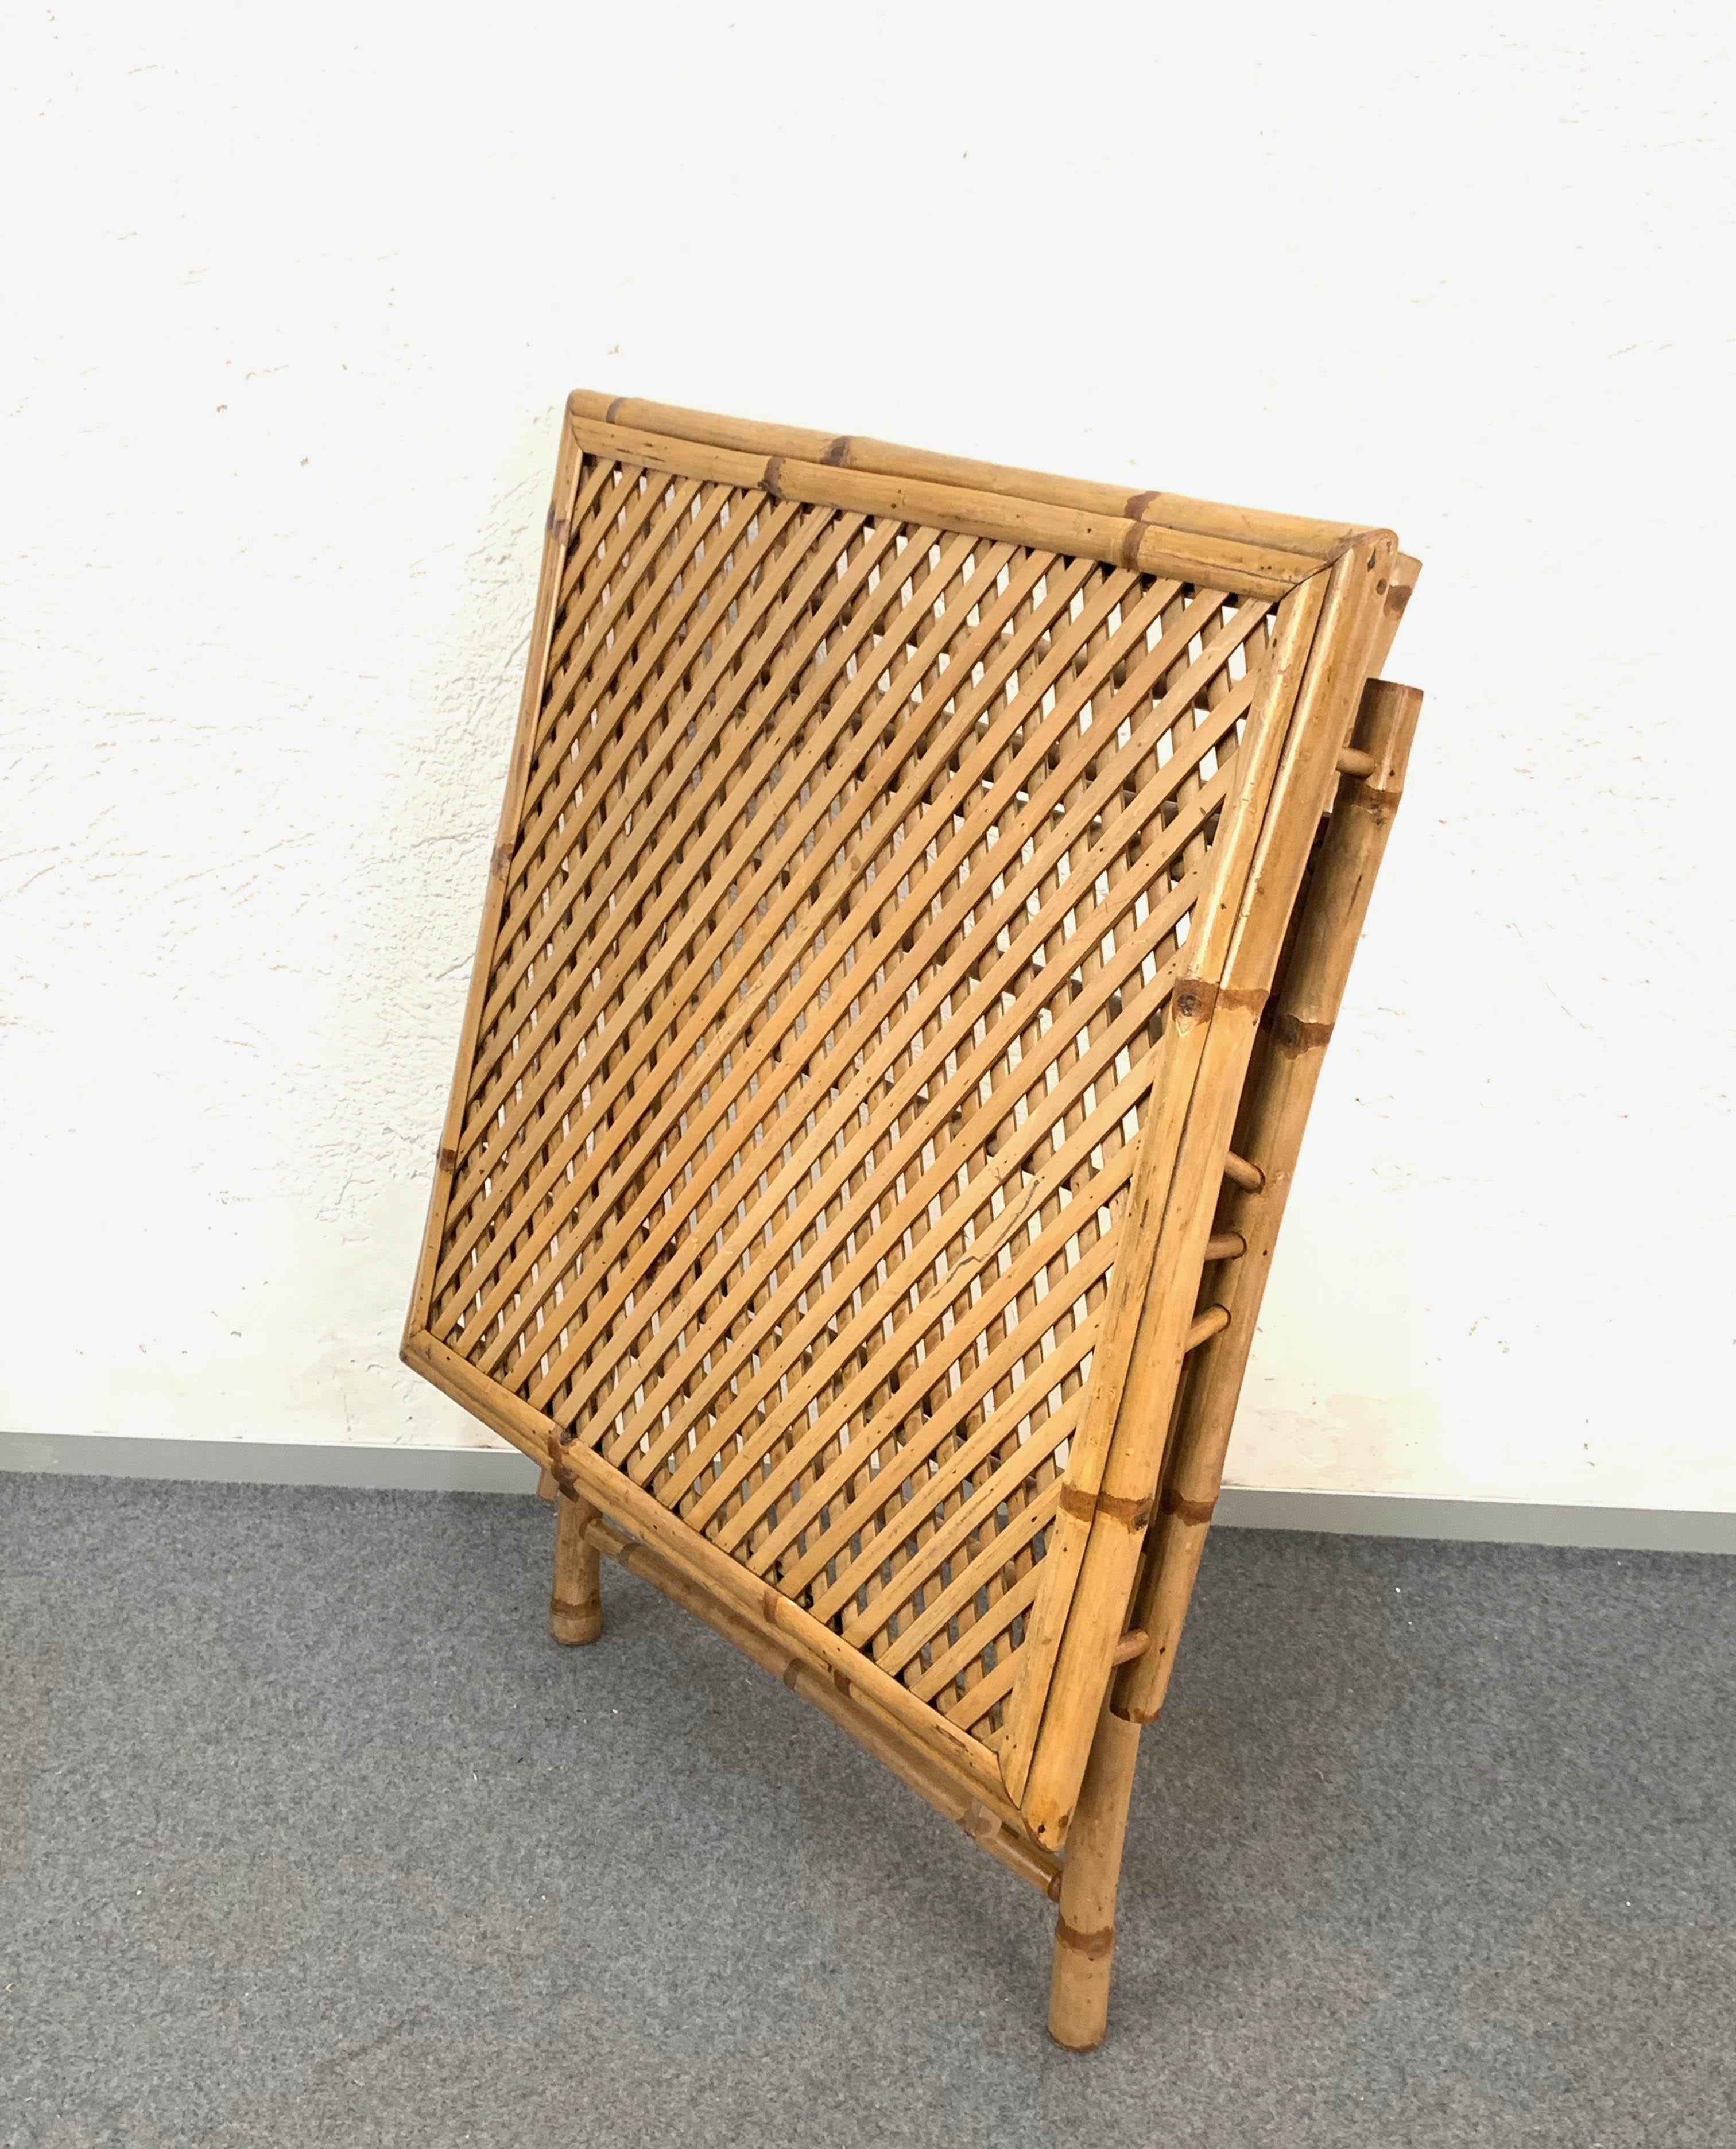 Midcentury Bamboo and Rattan Italian Foldable Table and Four Chairs, 1960s For Sale 6